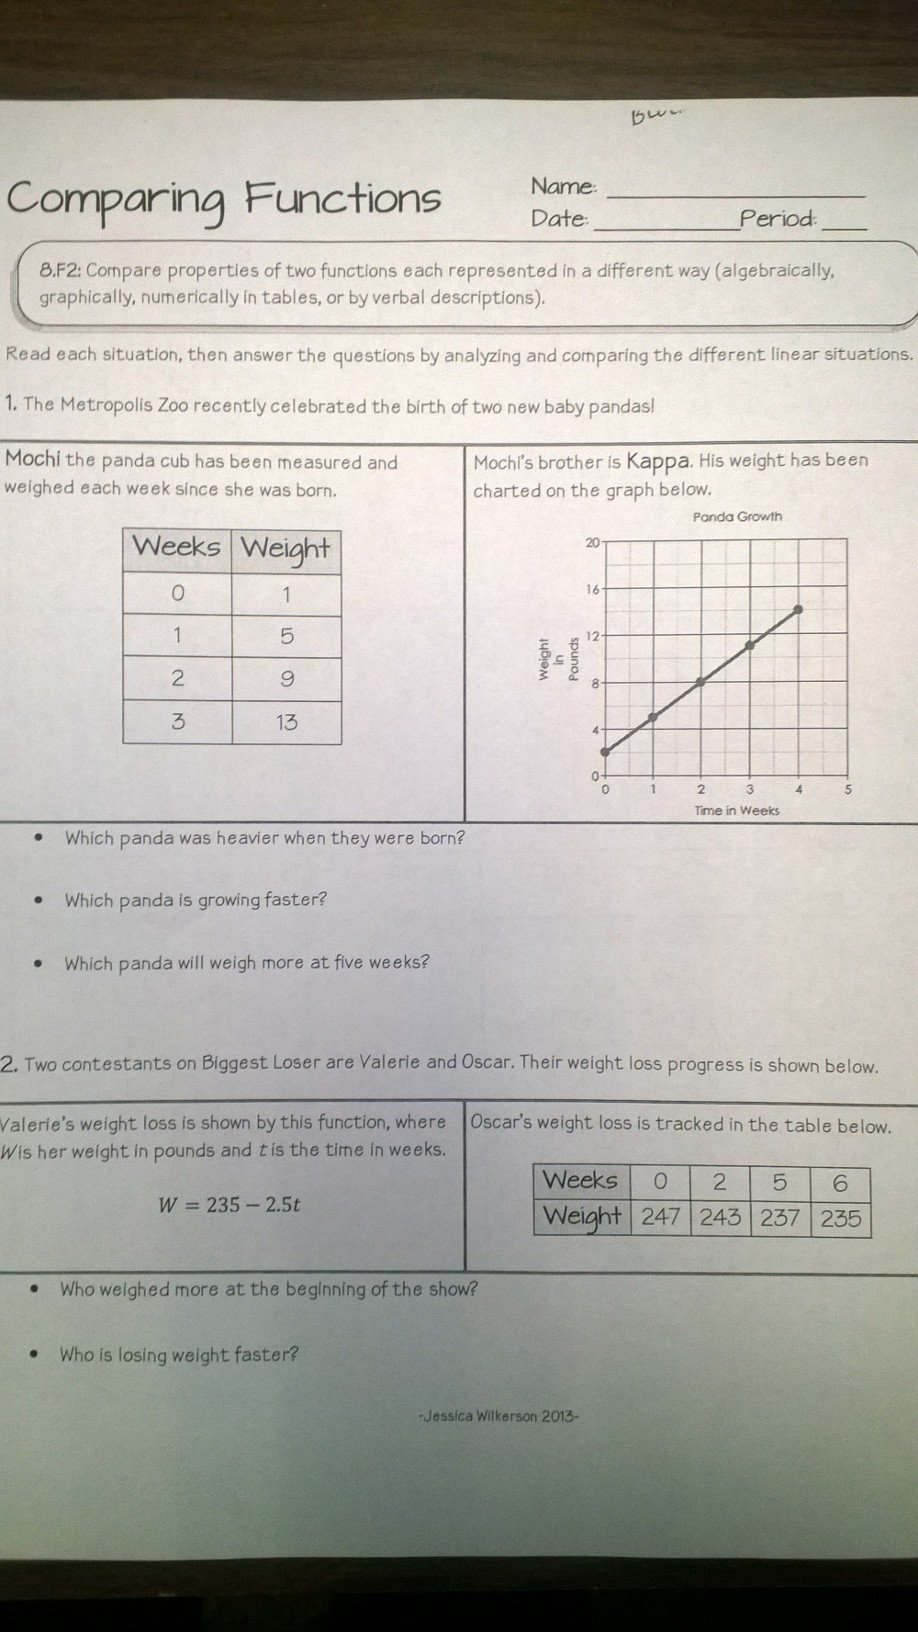 Comparing Functions Worksheet Answers